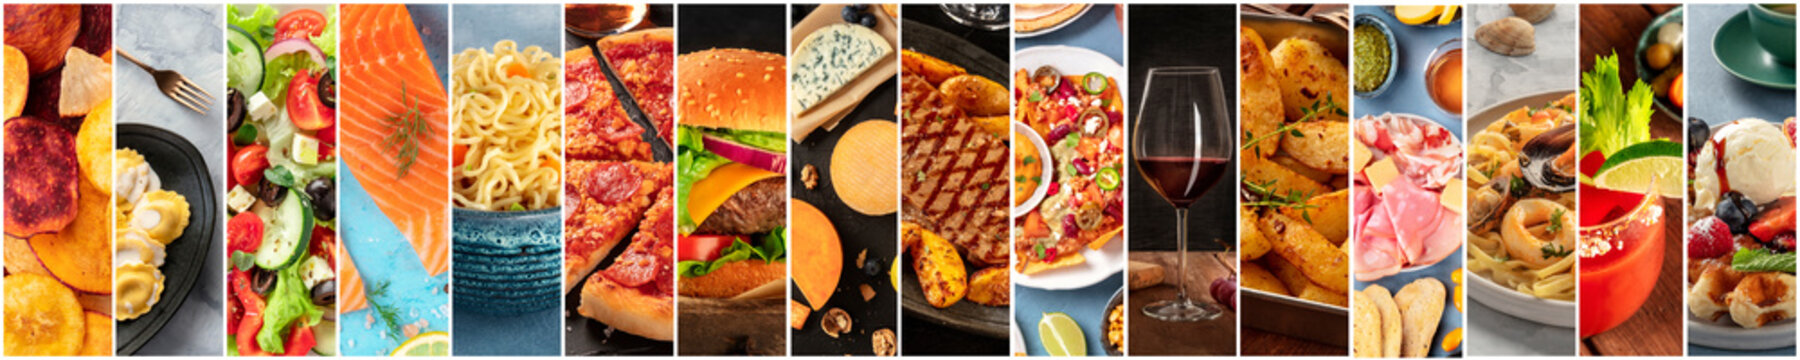 Food collage design template. Various tasty dishes, including a burger, a pizza, seafood, beef steak. A restaurant menu cover or a groceries shop flyer